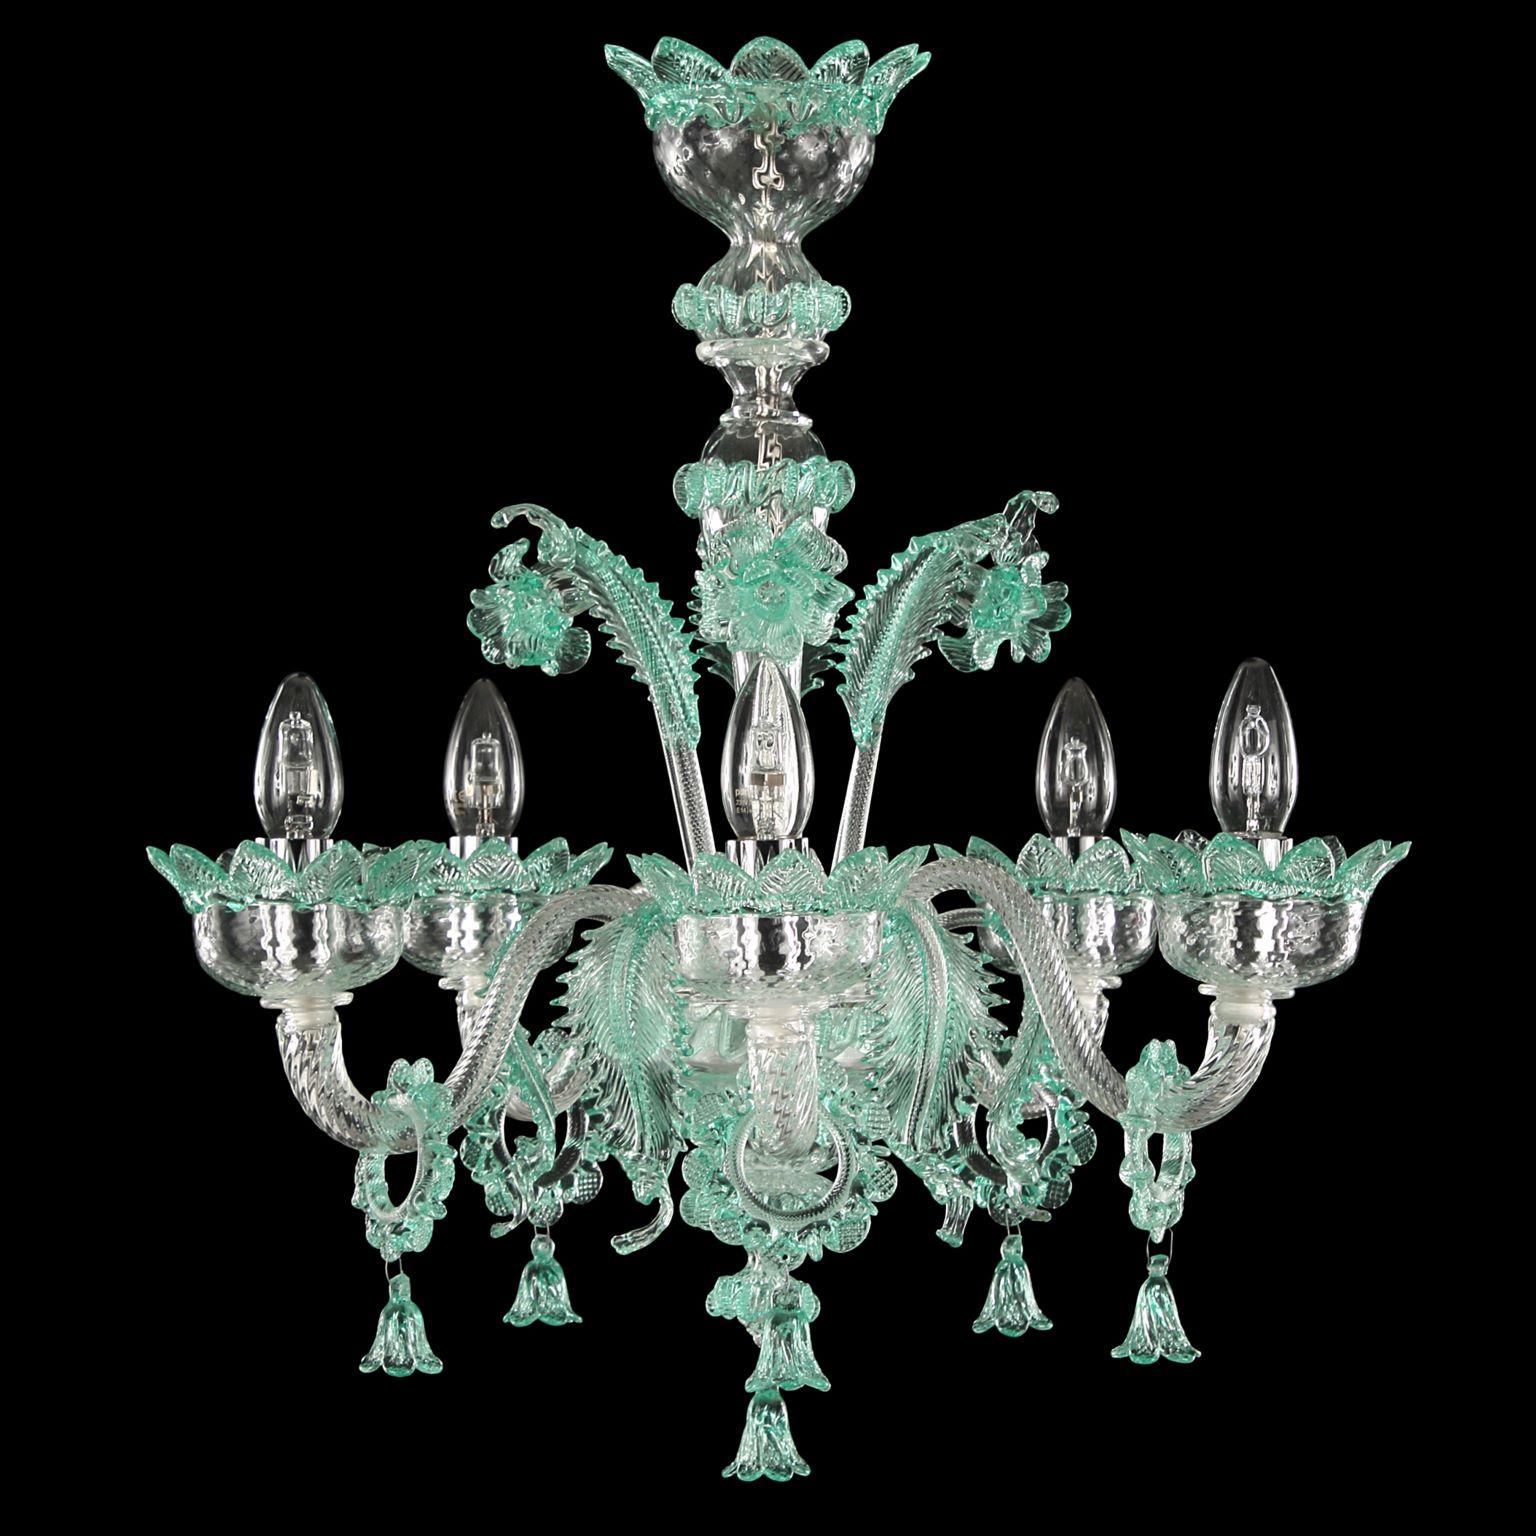 Classic chandelier 5 arms clear and green Murano glass with rings by Multiforme.
The classic Murano glass chandelier, as it is in the collective imagination. As many other chandeliers in our collections, V-Classic 800 is designed with attention to